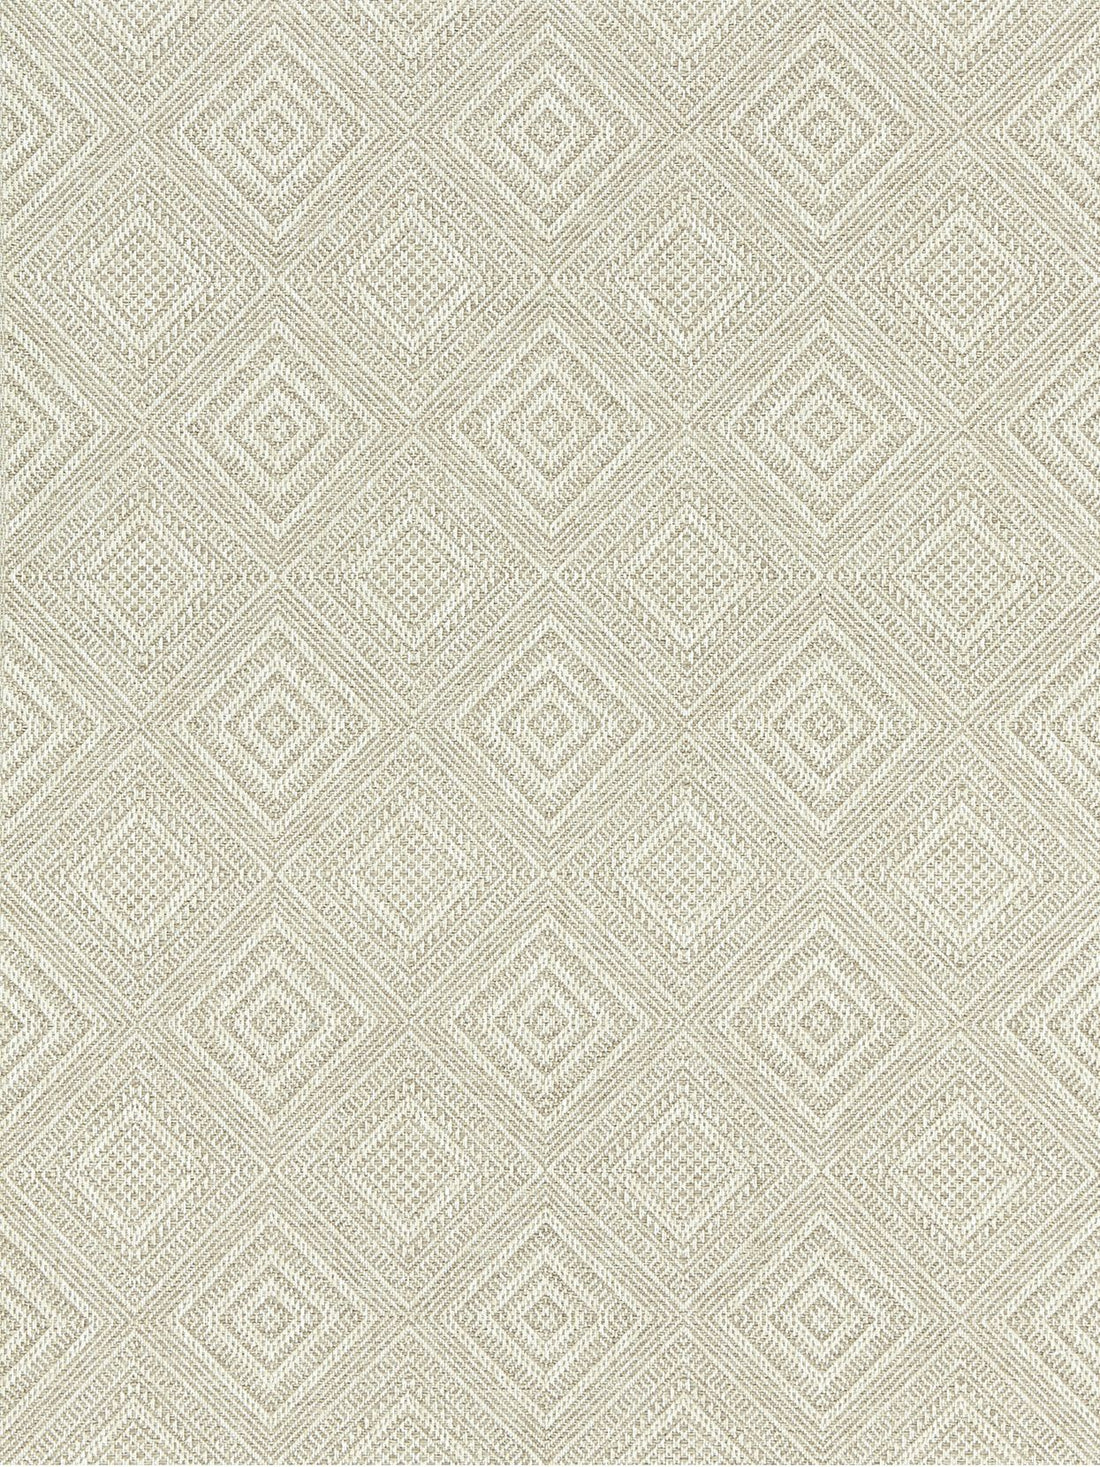 Antigua Weave fabric in linen color - pattern number SC 000227197 - by Scalamandre in the Scalamandre Fabrics Book 1 collection